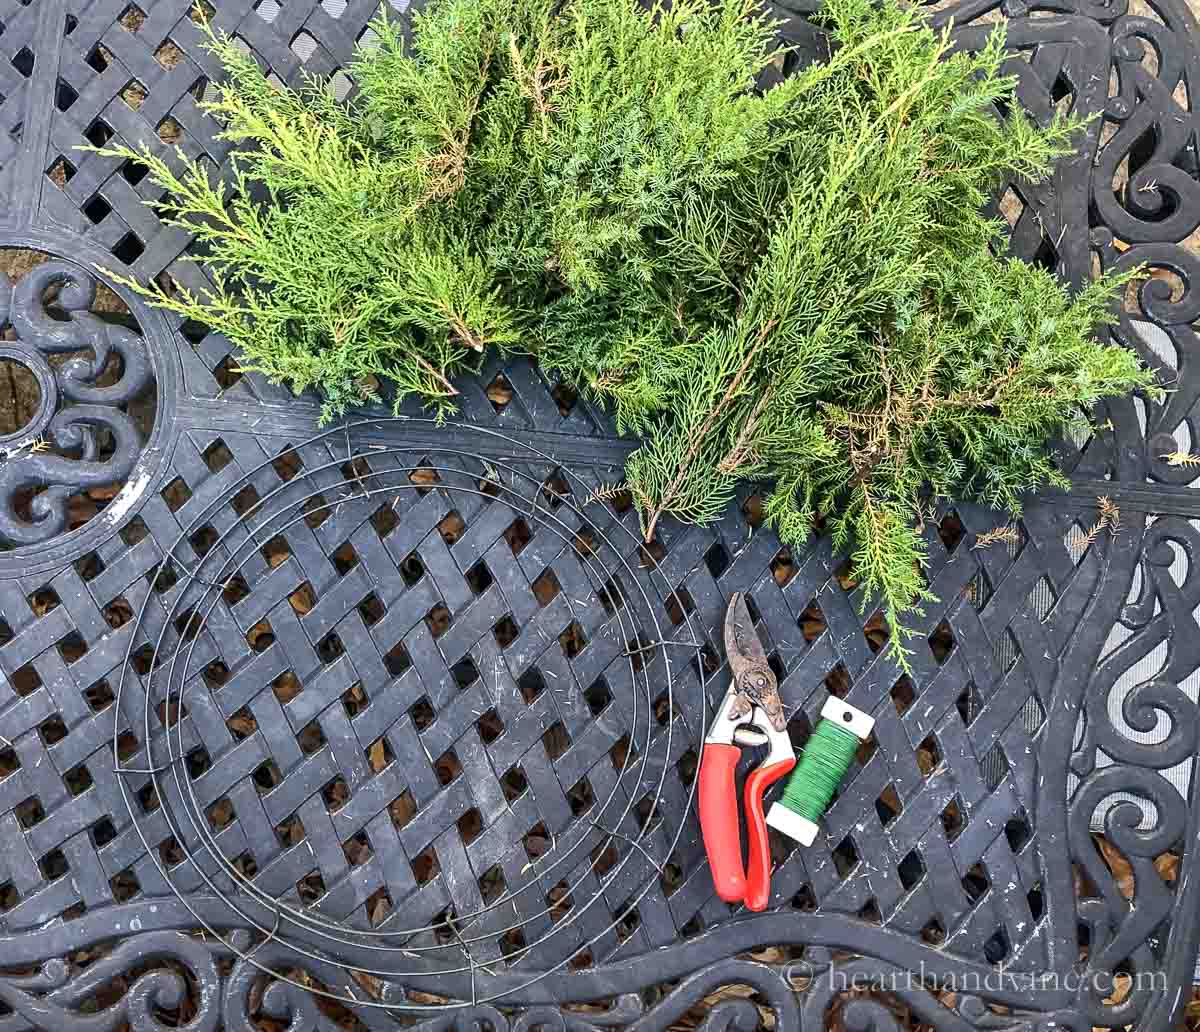 Evergreen wreath supplies including a wire wreath, juniper cuttings, pruners and a florist wire paddle.